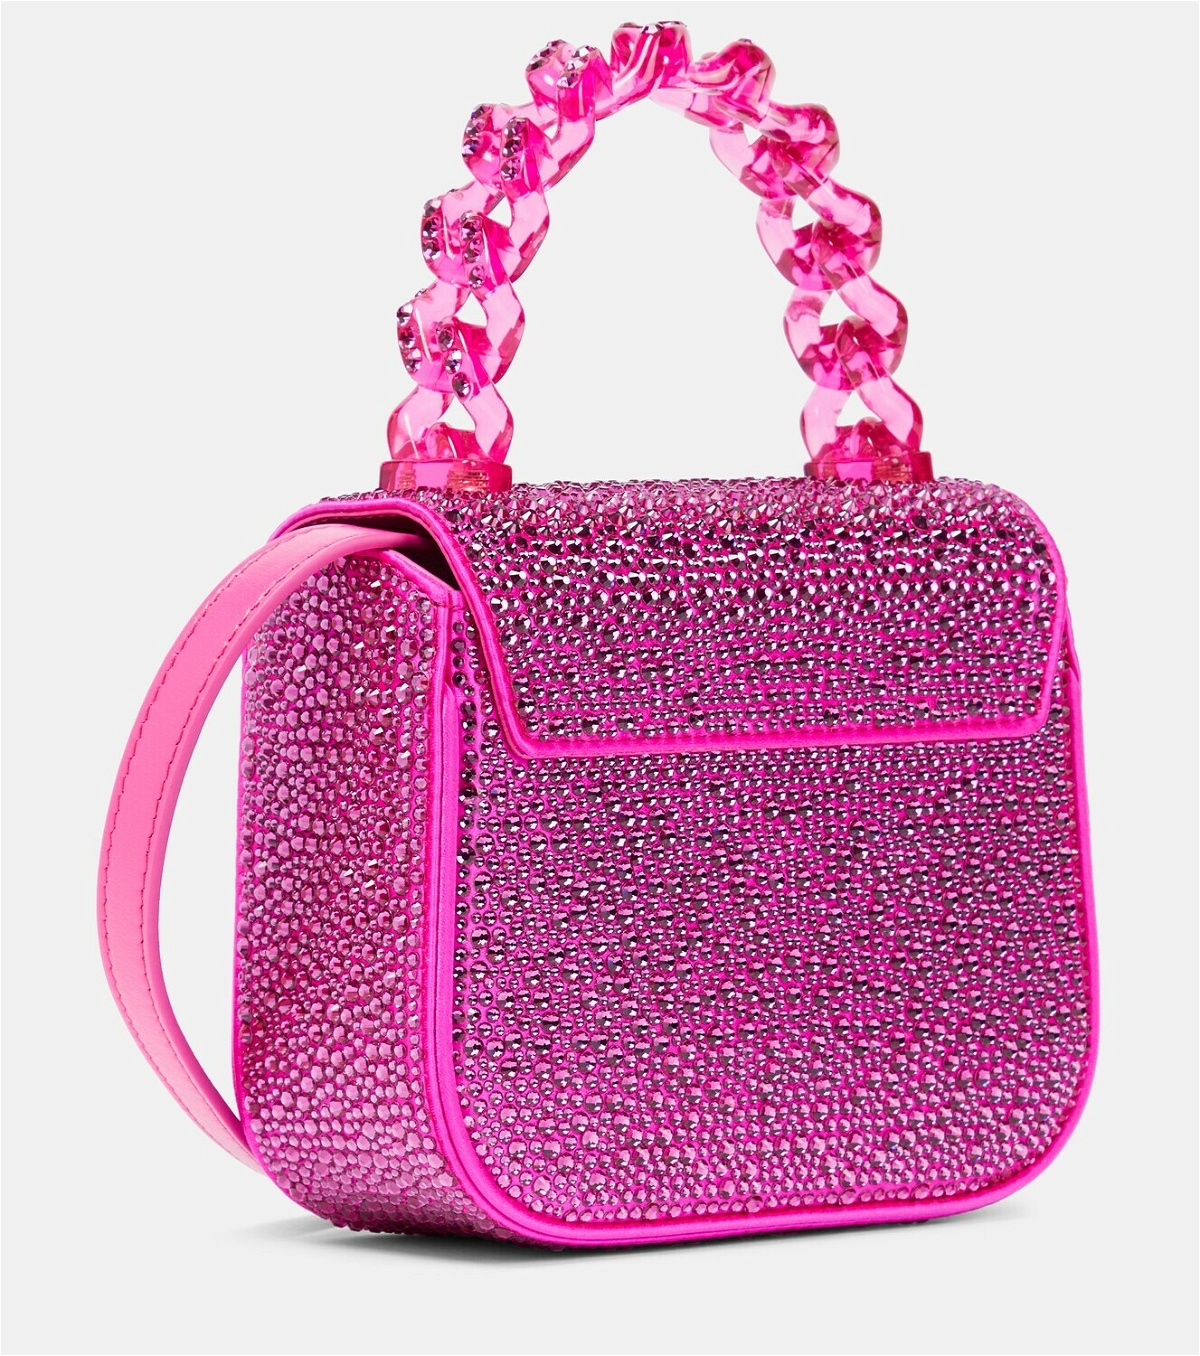 VERSACE girls' bags & handbags, compare prices and buy online